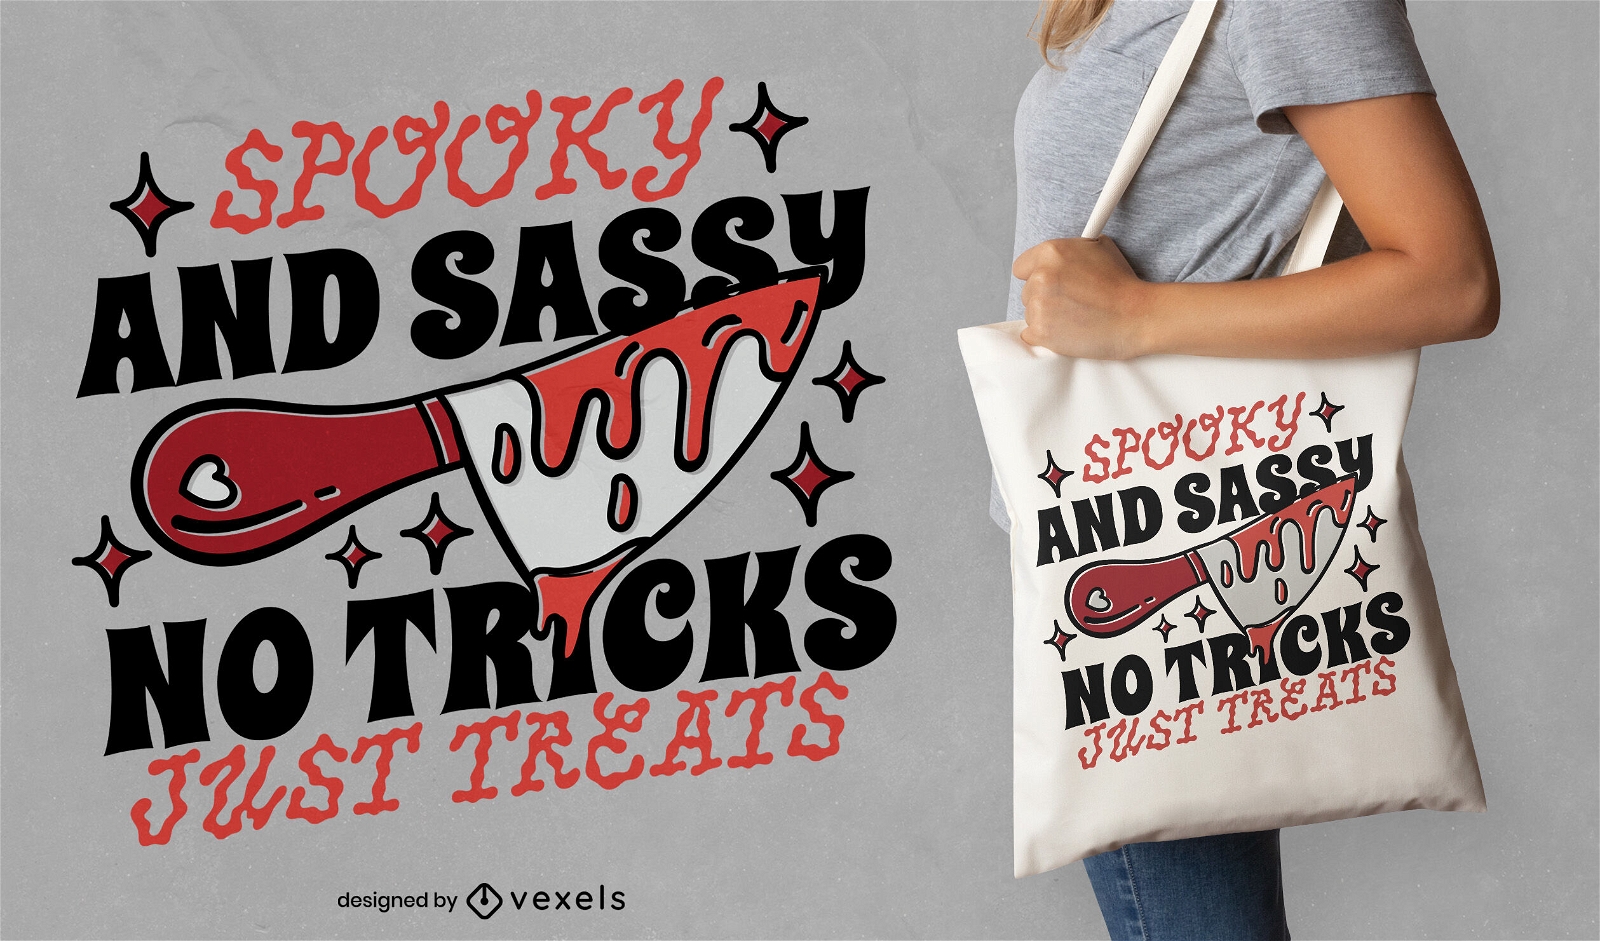 Spooky and sassy tote bag design